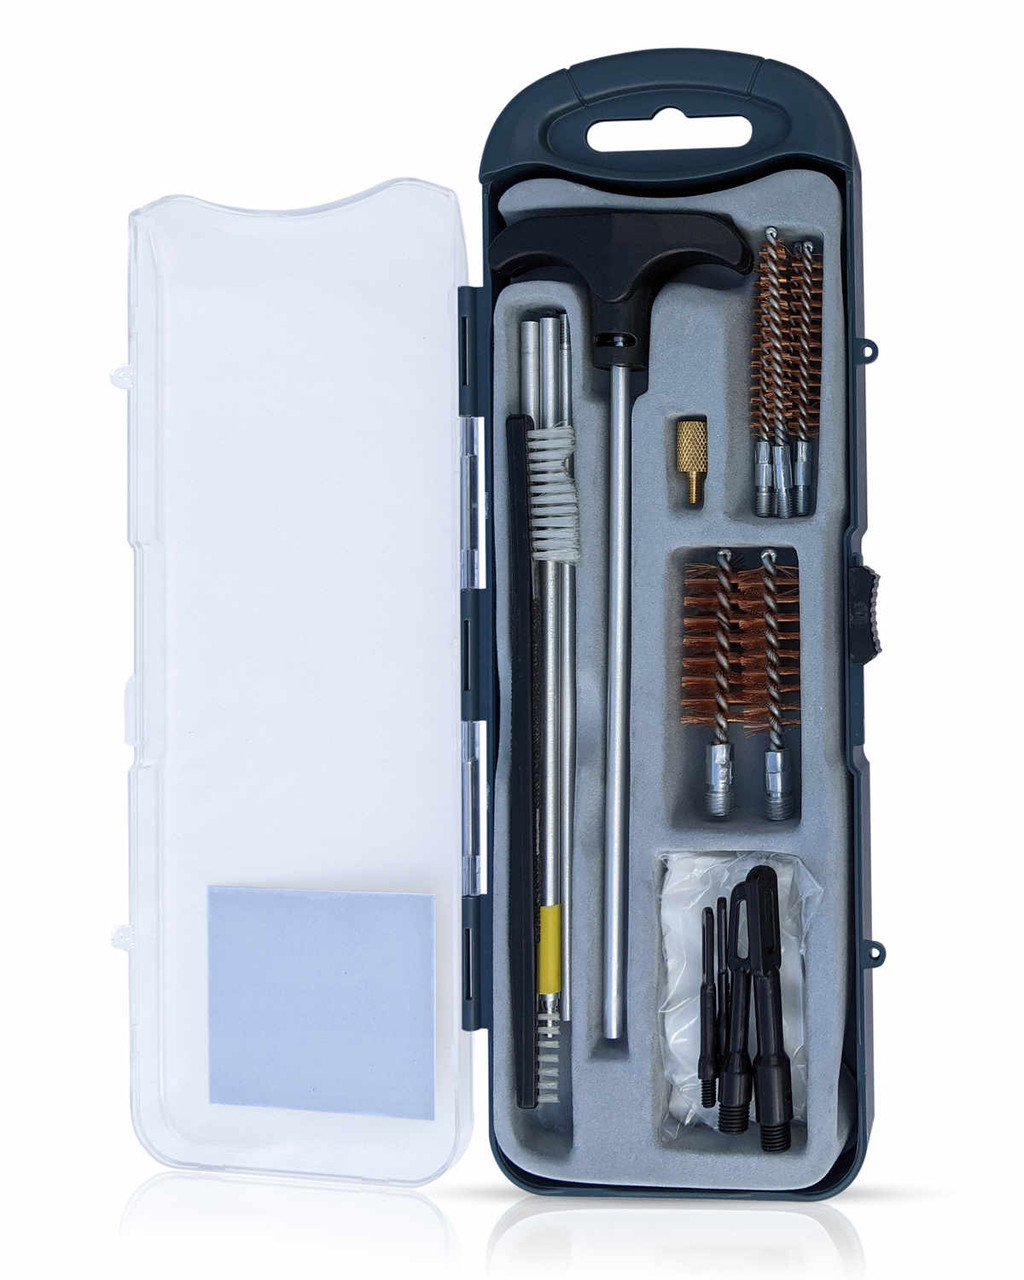 Tactical Cleaning Kit - Portable Universal Gun Cleaning Kit